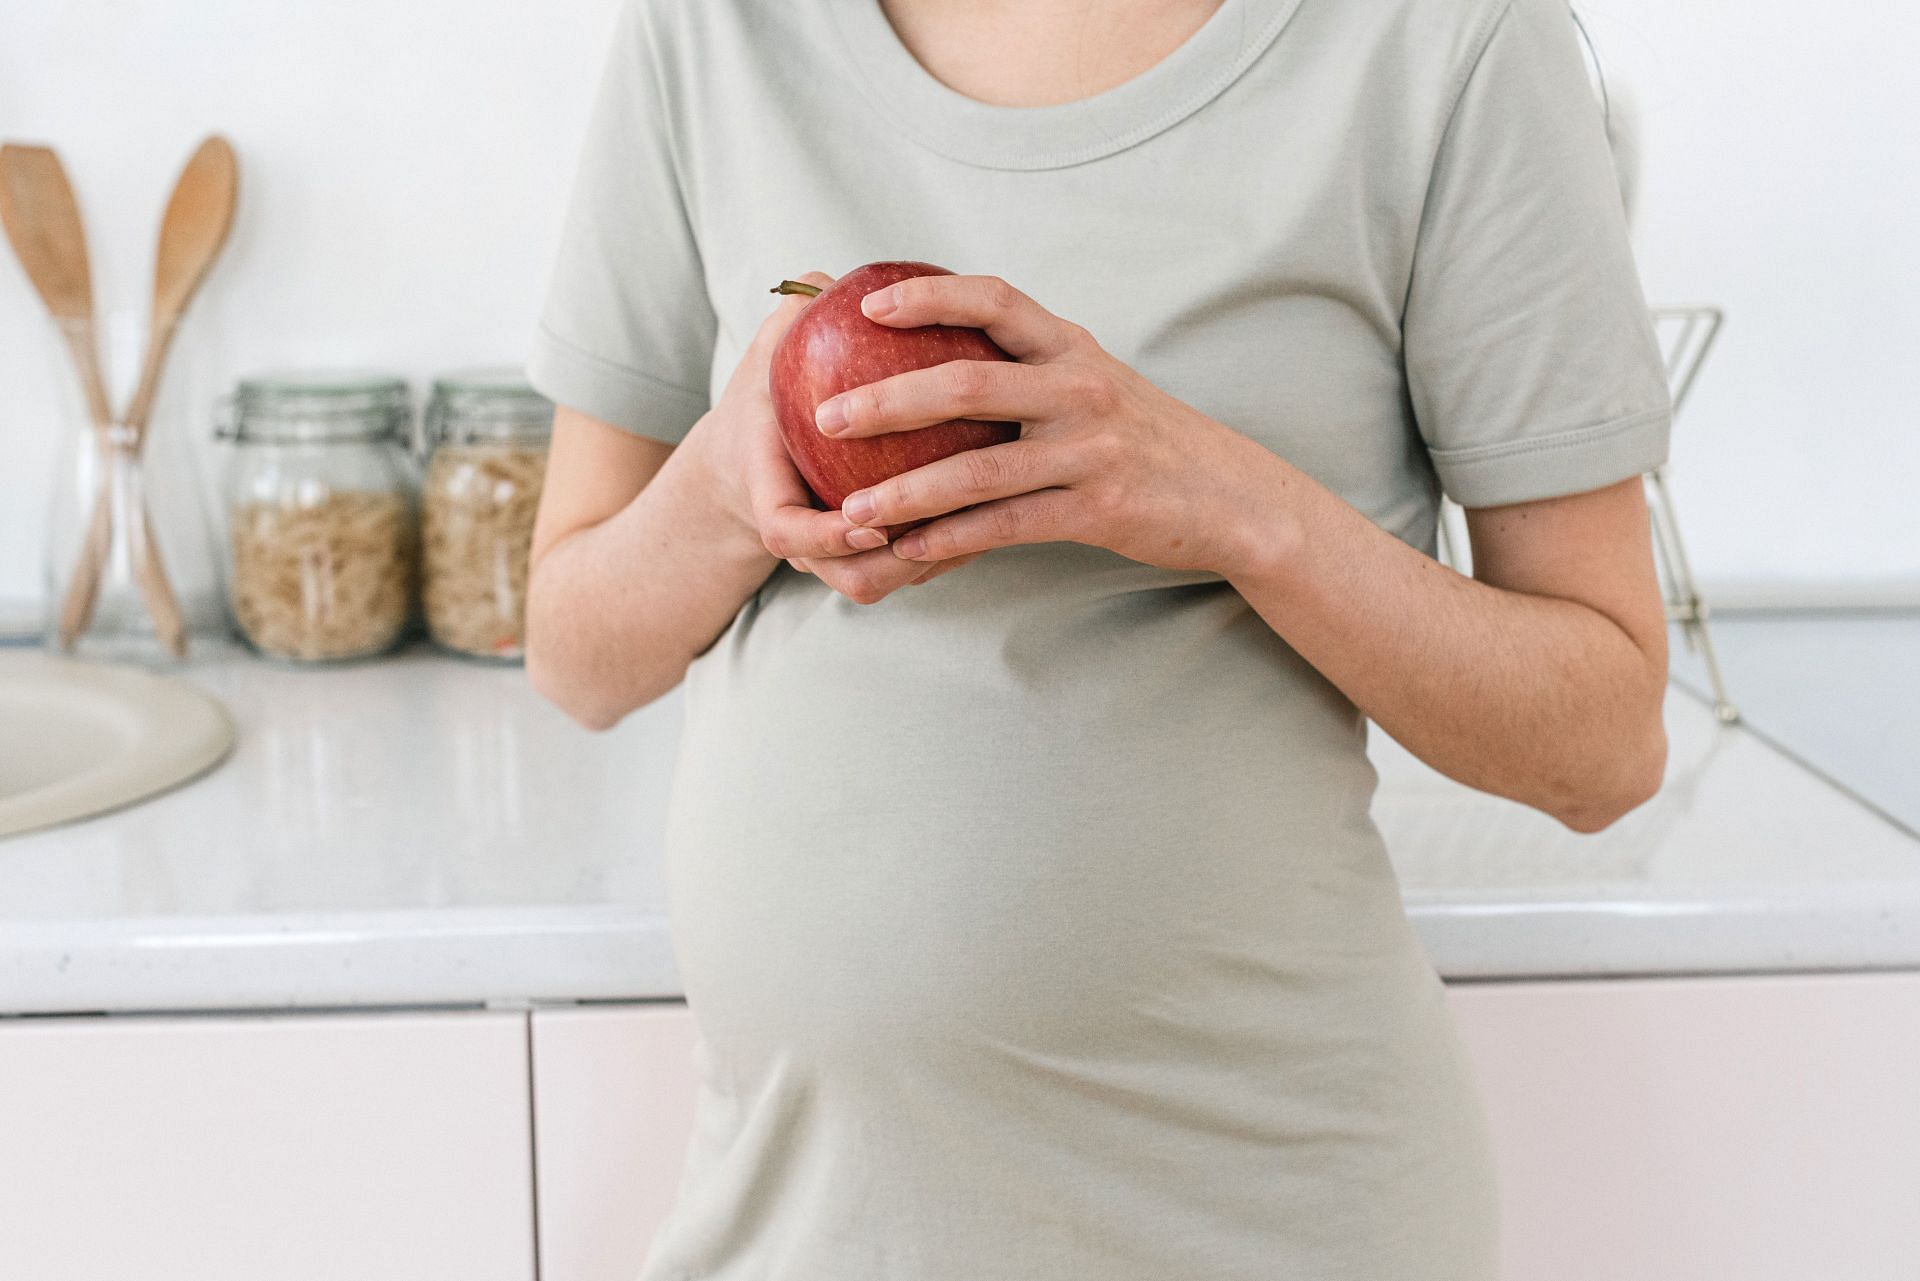 Boost Your Energy and Nourish Your Baby with These 7 Healthy Pregnancy Snacks (Image via Pexels)